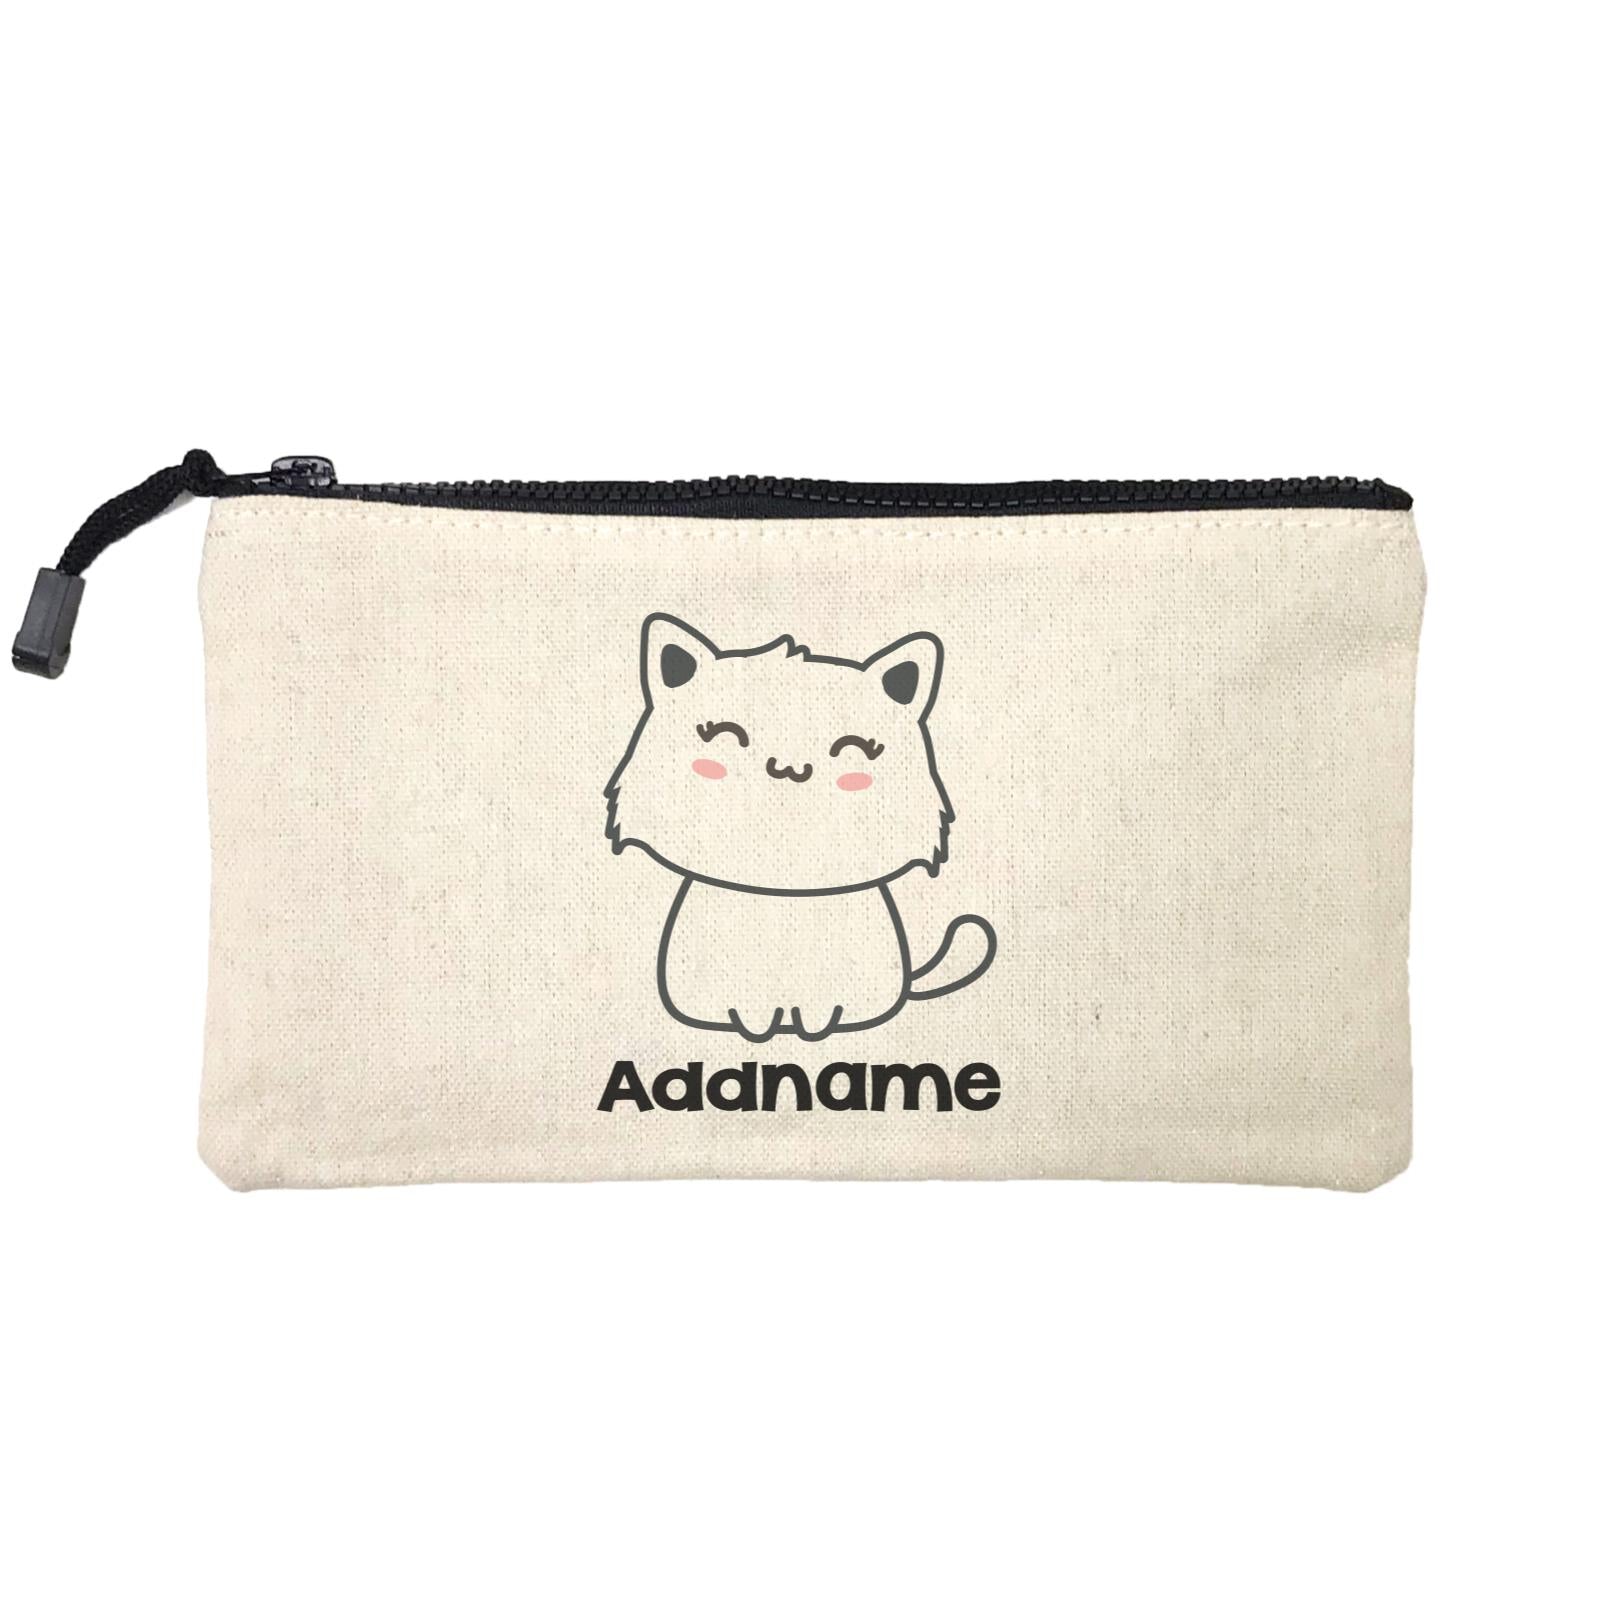 Drawn Adorable Cats White Addname Mini Accessories Stationery Pouch